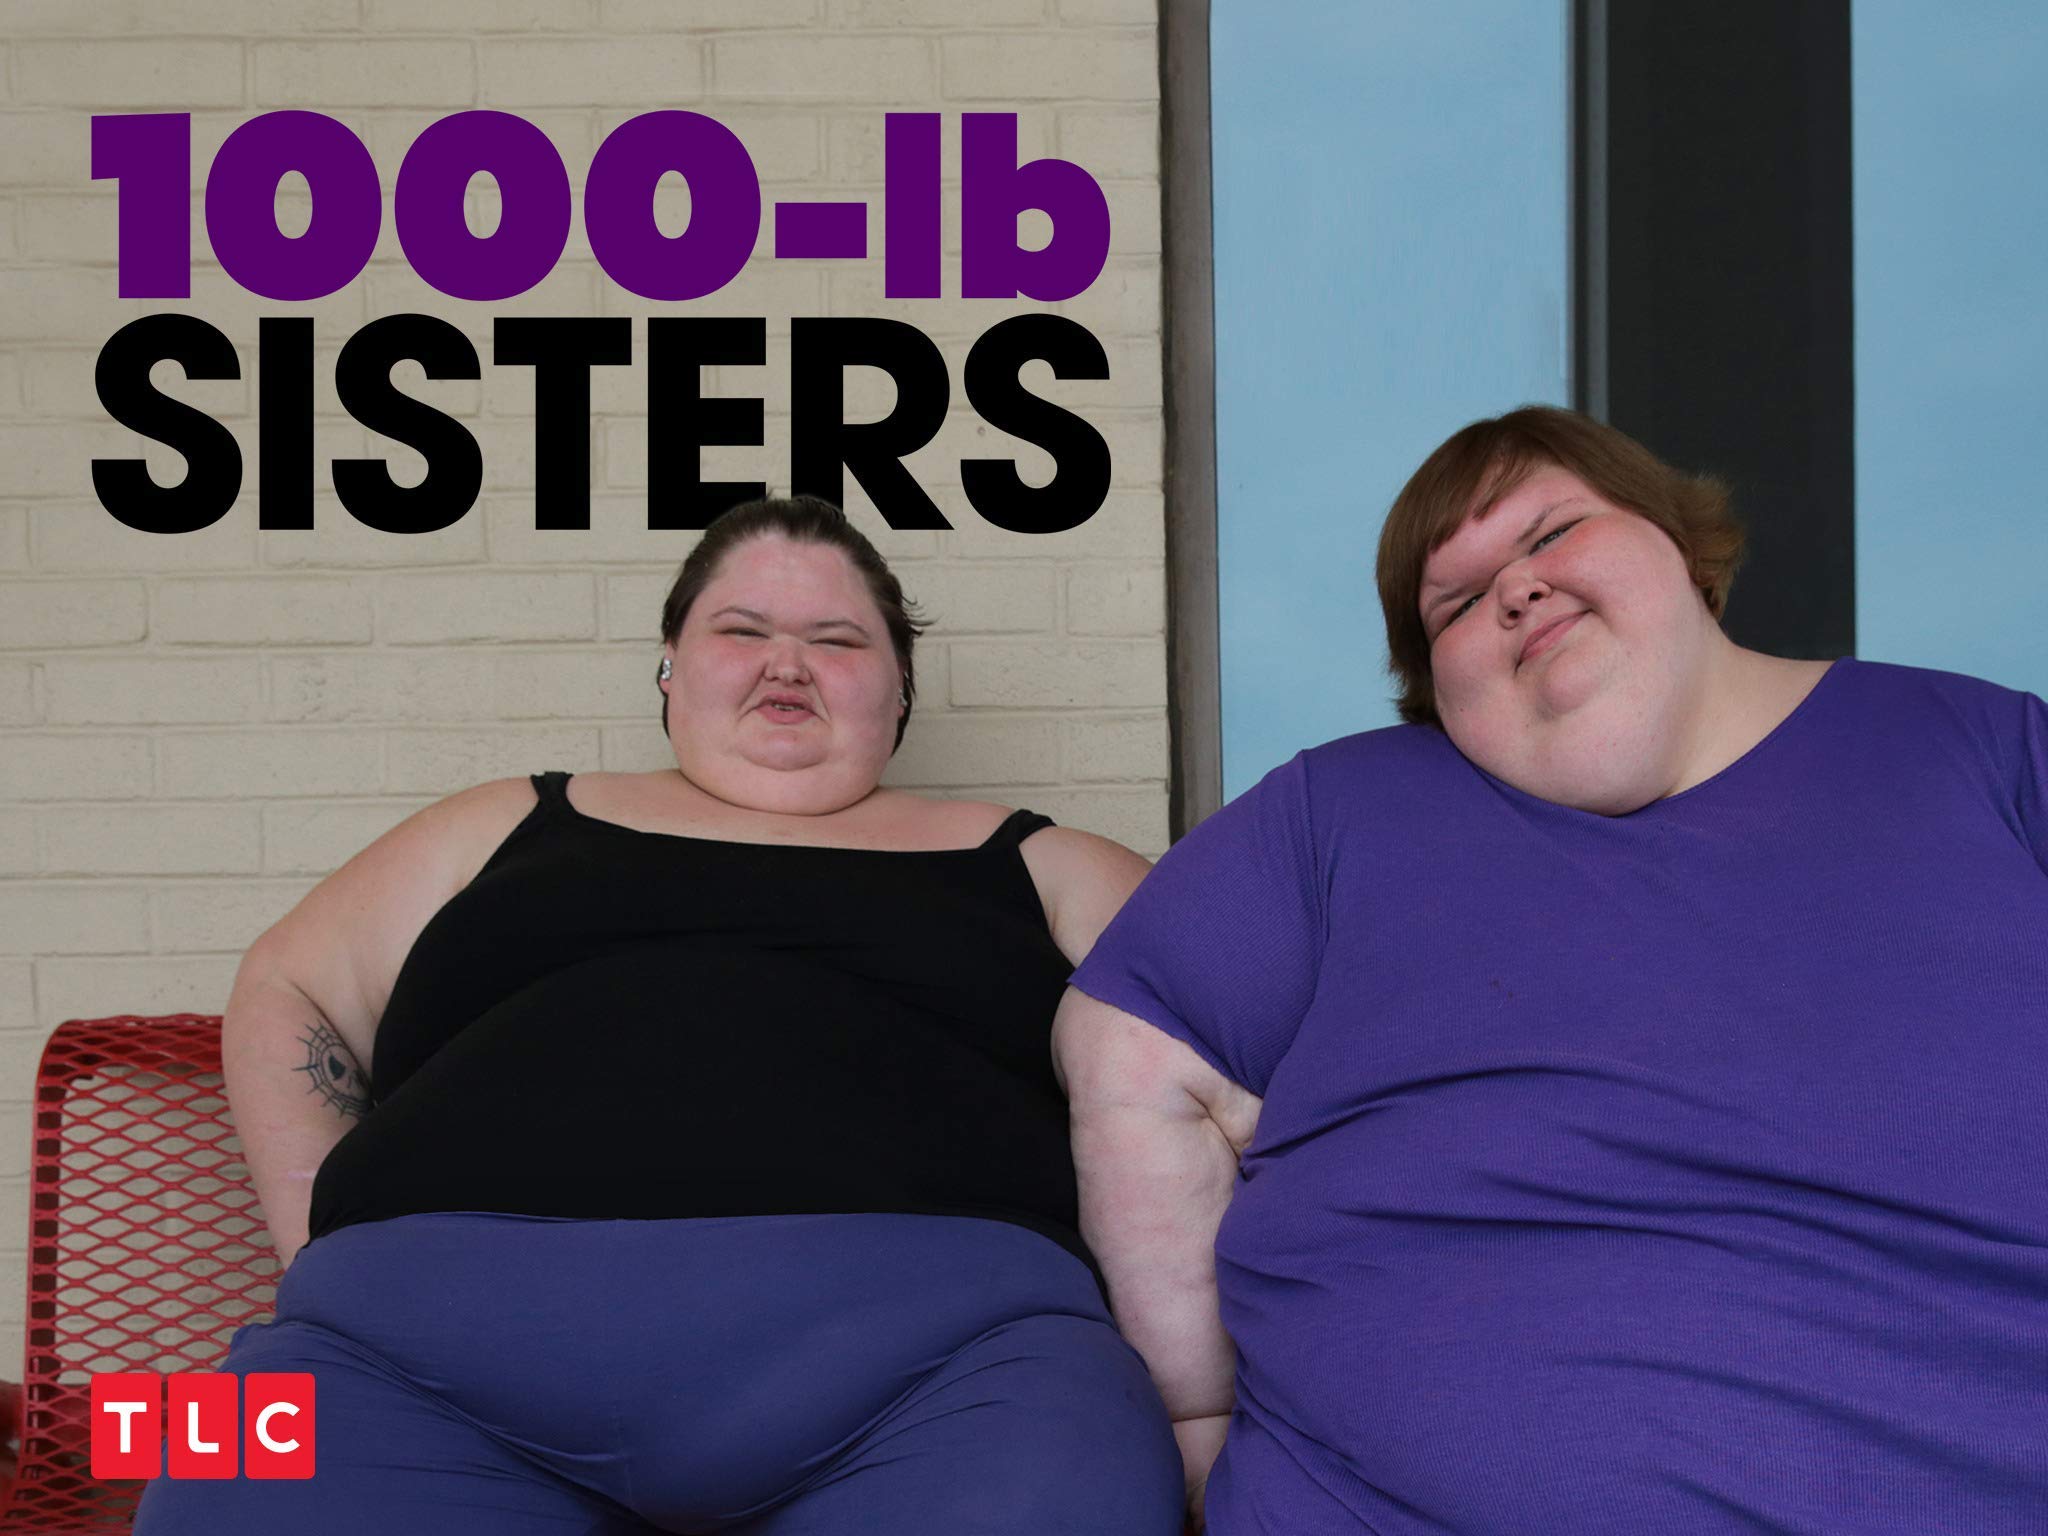 Finished Binging 1000 Lb Sisters Watch These Addictive Tlc Shows Now Film Daily